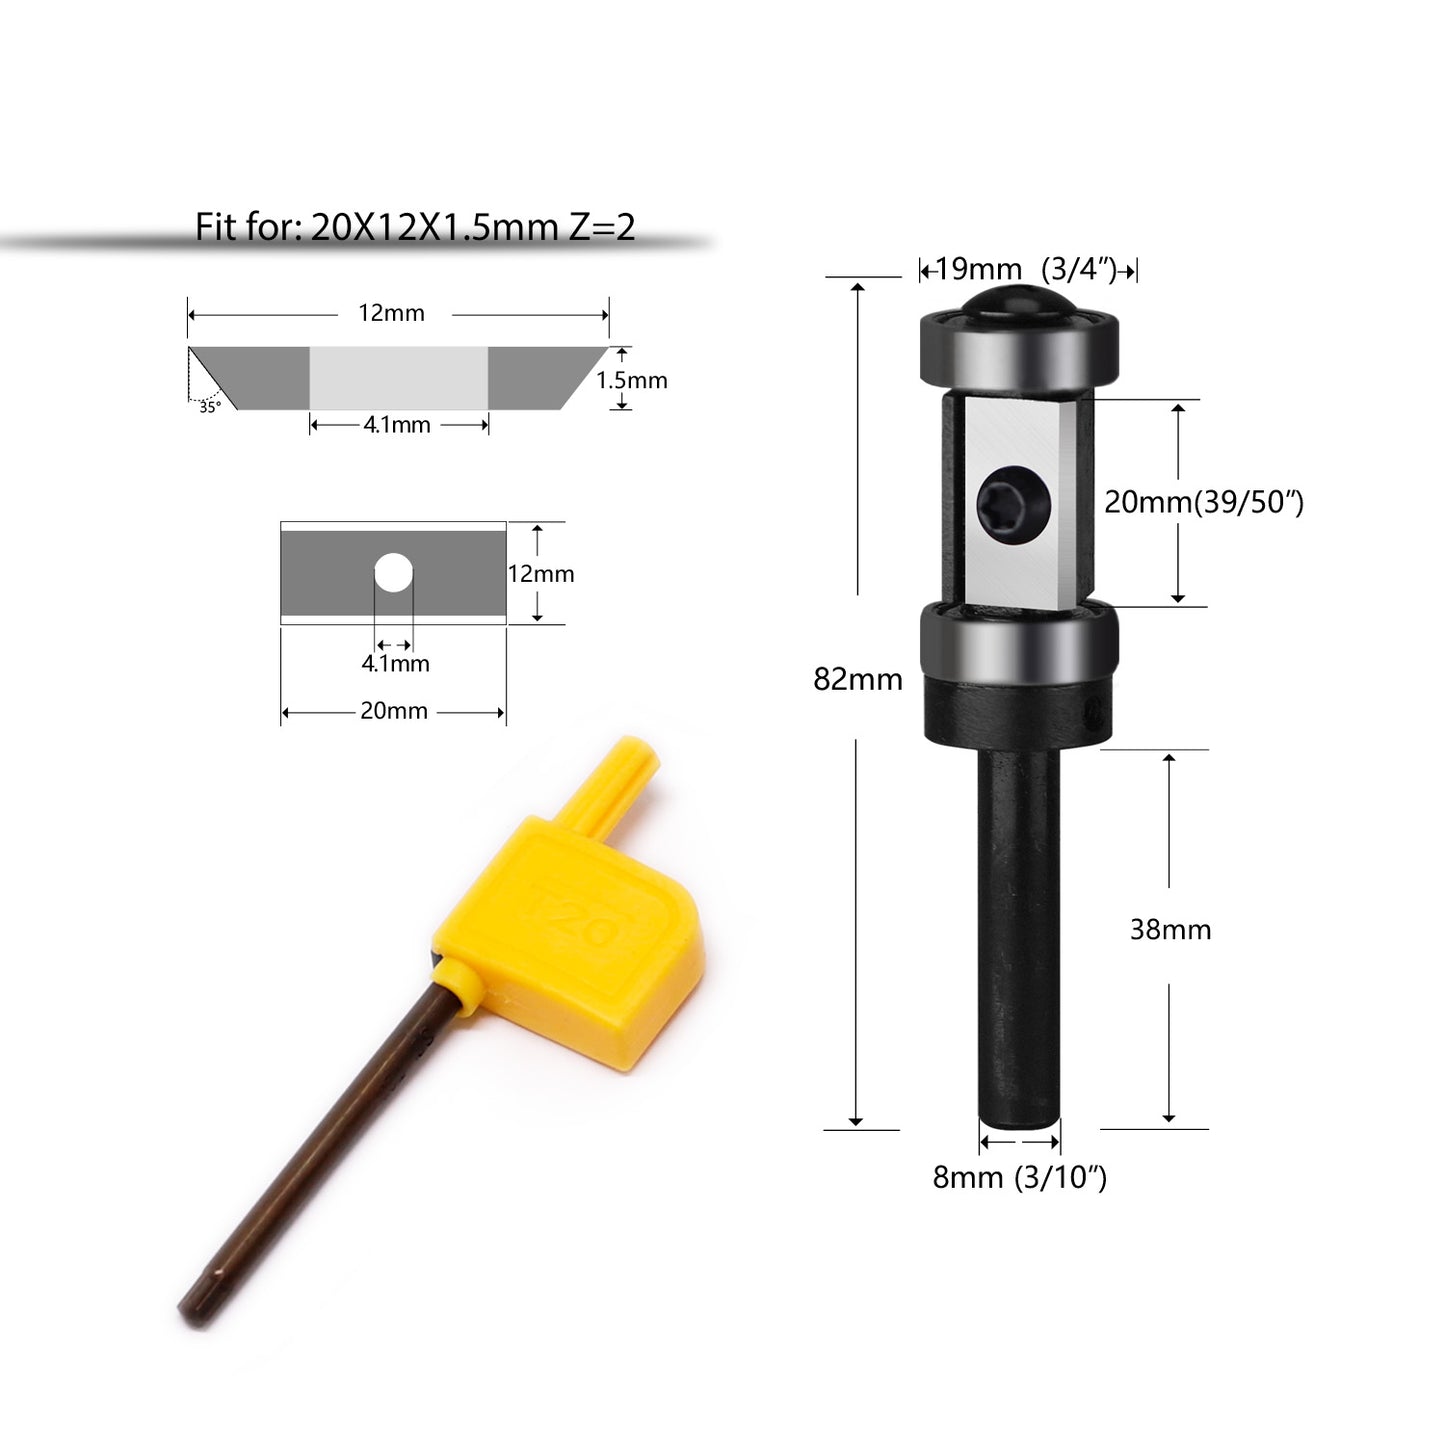 double bearing flush trim router bit with 8 mm shank diameter, 20 mm cutting length, 19 mm cutting diameter, 82 mm overall length